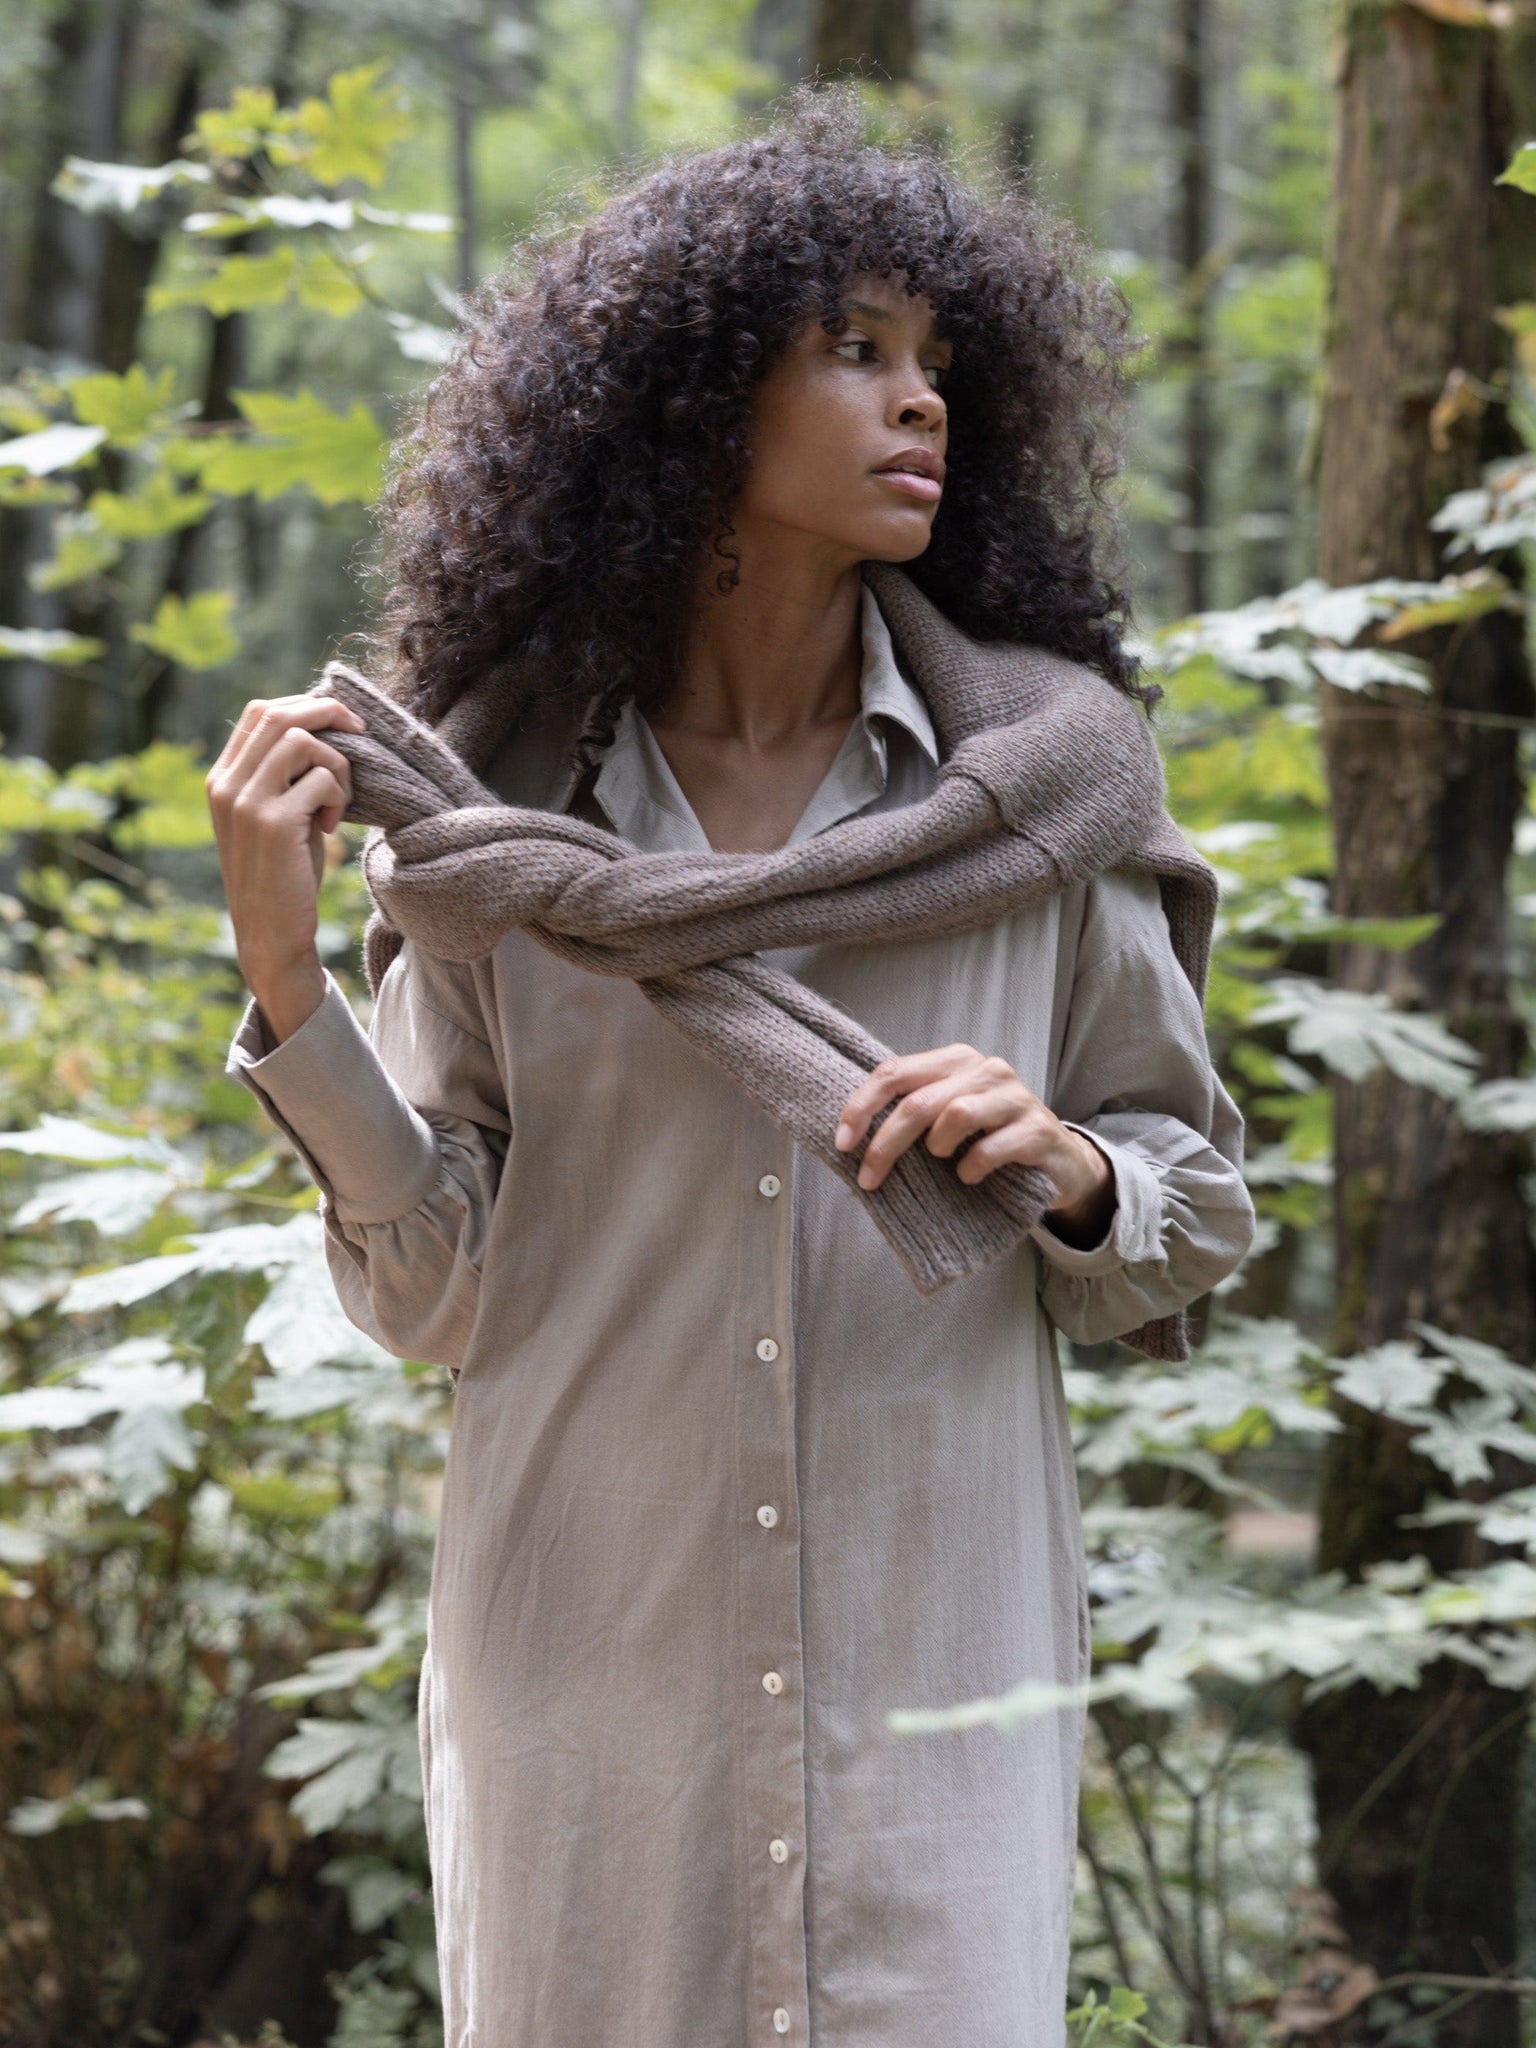 A woman wearing a Dillon Dress - Mushroom - XXL - Sample and scarf explores the woods.